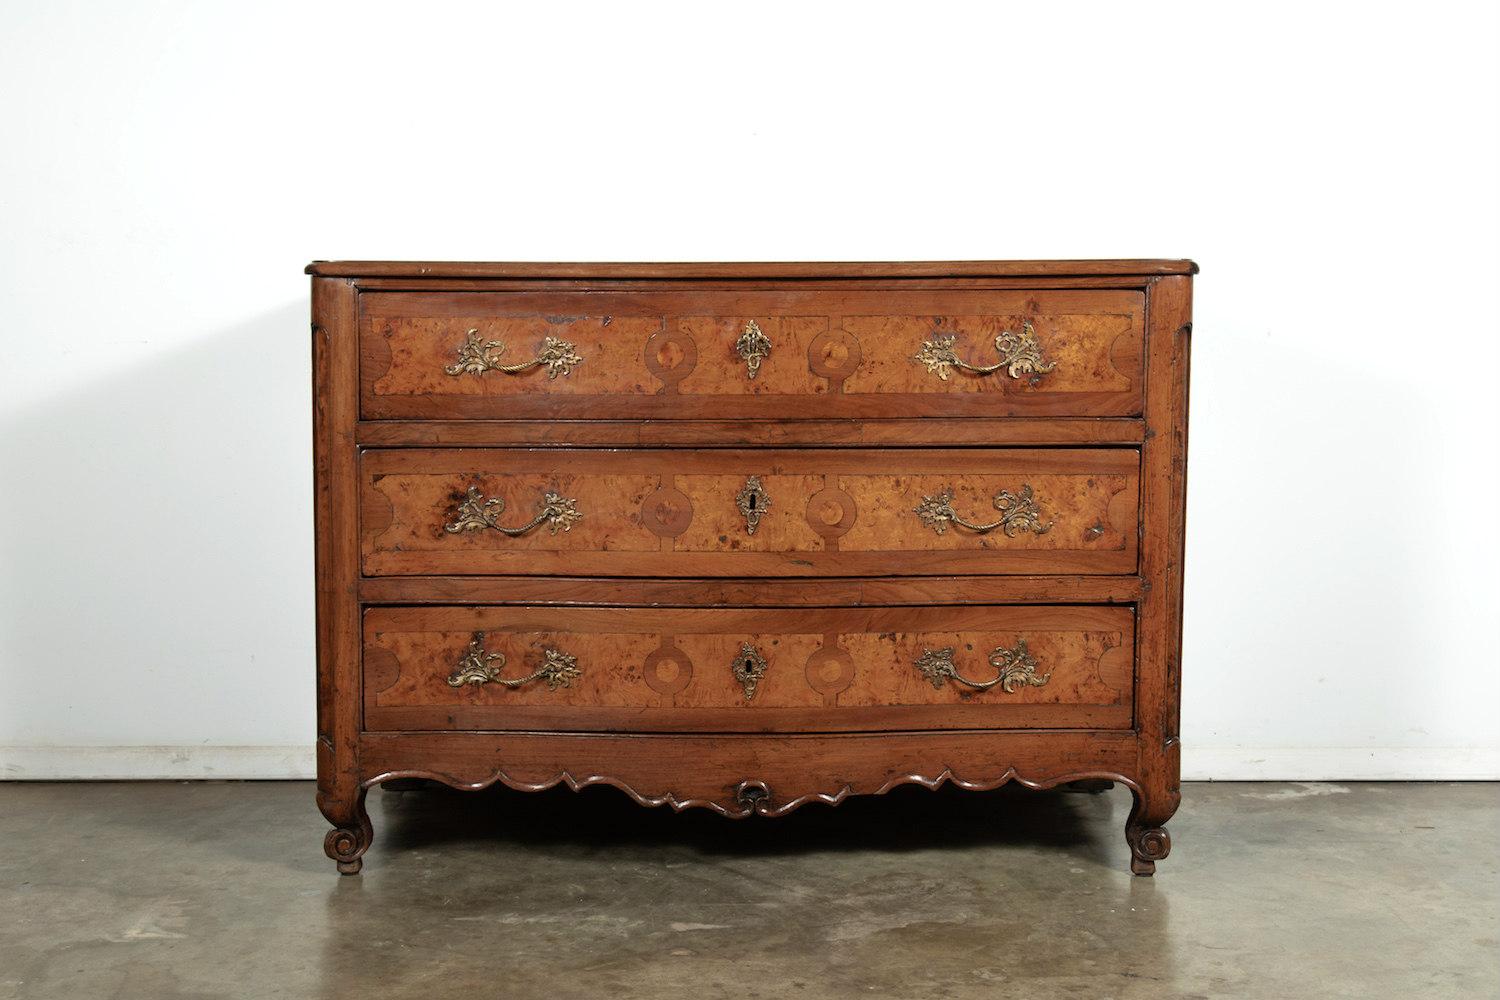 Exceptional mid-18th century French Louis XV period commode de galbée handcrafted of chestnut with burled chestnut and fruitwood parquetry by master artisans near Marseilles. Curved front having three drawers with gilt bronze lockwork, escutcheons